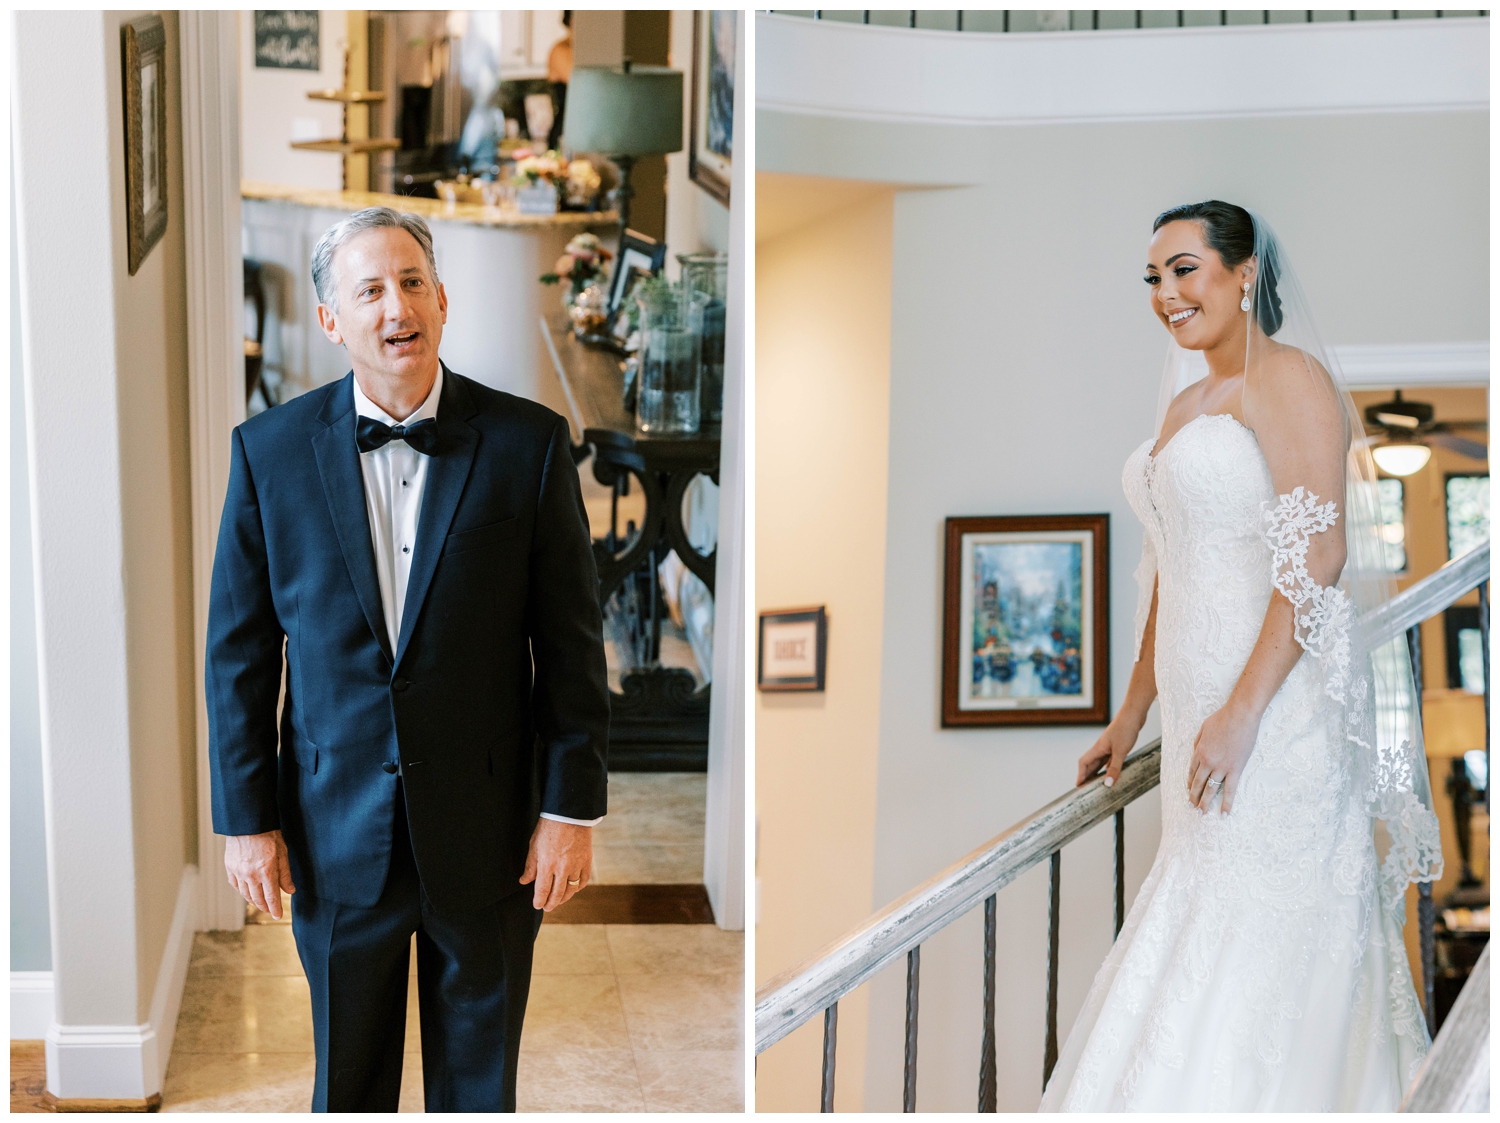 father seeing his daughter walk down stairs in wedding gown